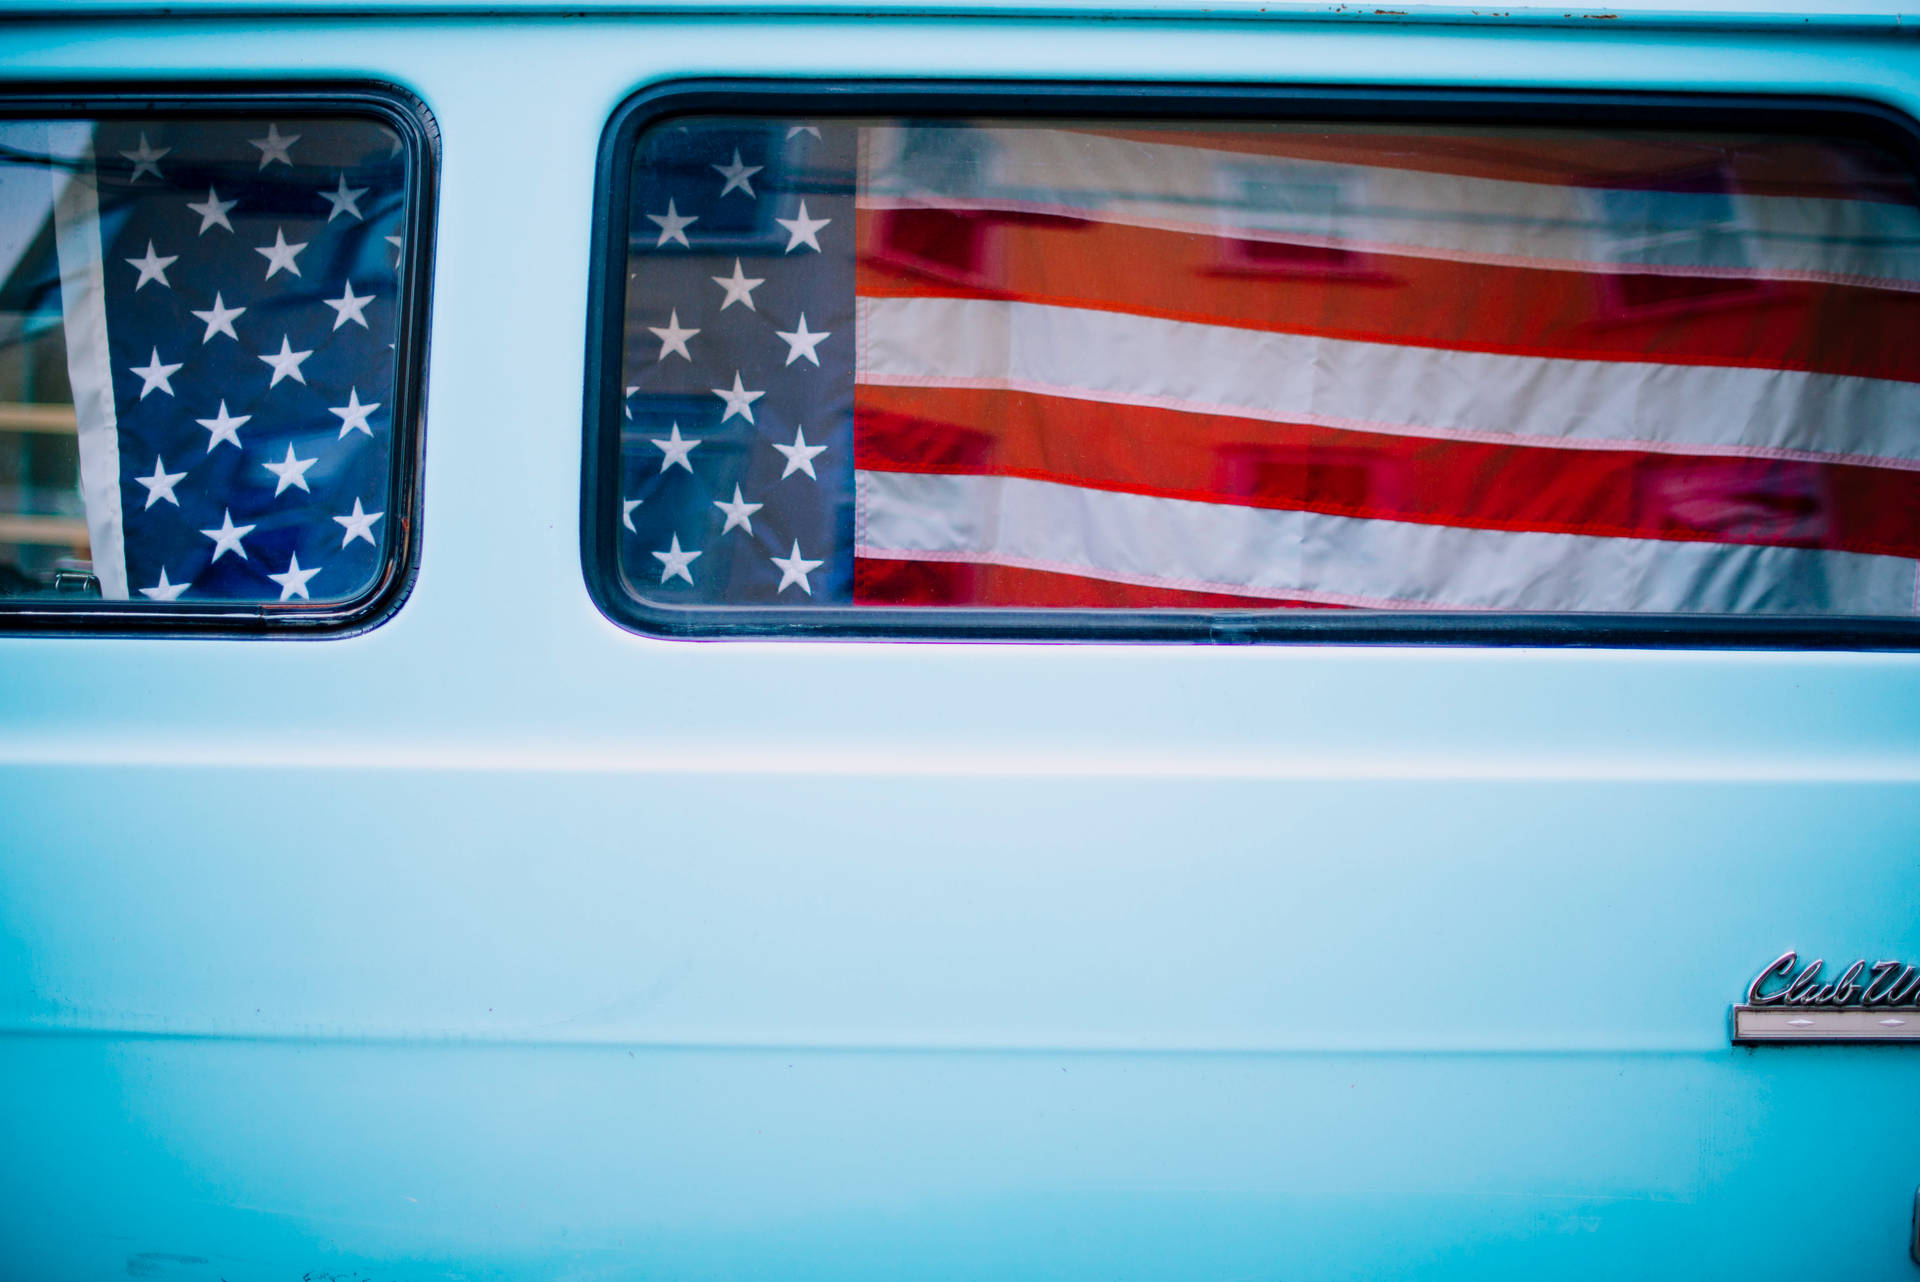 6016X4016 American Flag Wallpaper and Background